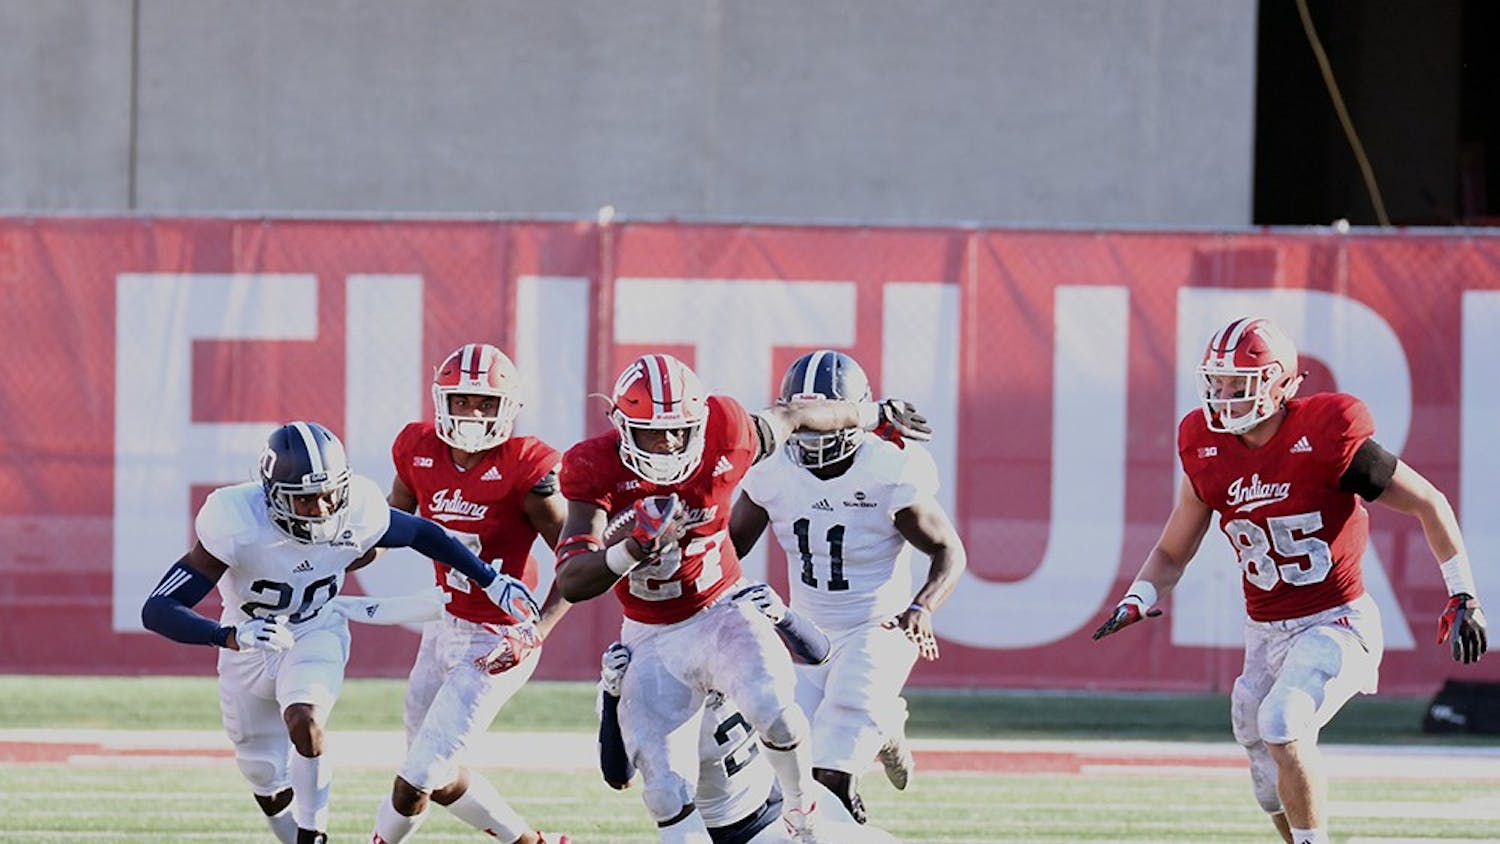 Then-freshman running back Morgan Ellison runs the ball against Georgia Southern on September 23, 2017, at Memorial Stadium. On Friday, Ellison was suspended indefinitely by the team.&nbsp;